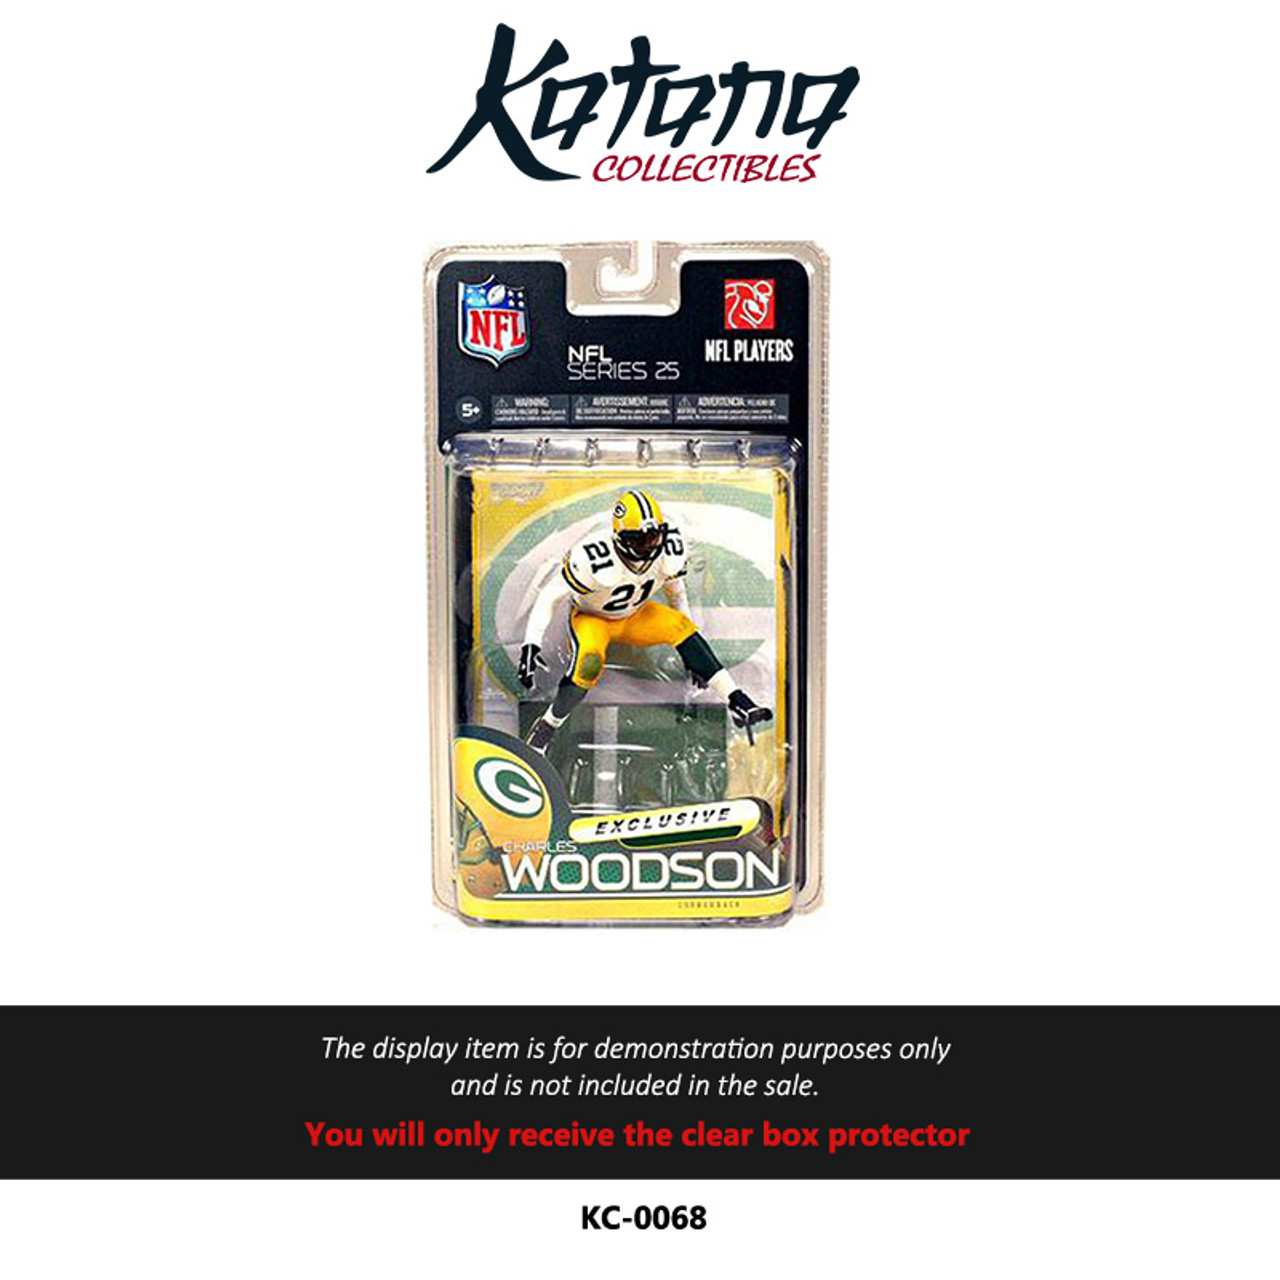 Katana Collectibles Protector For NFL Woodson Series 25